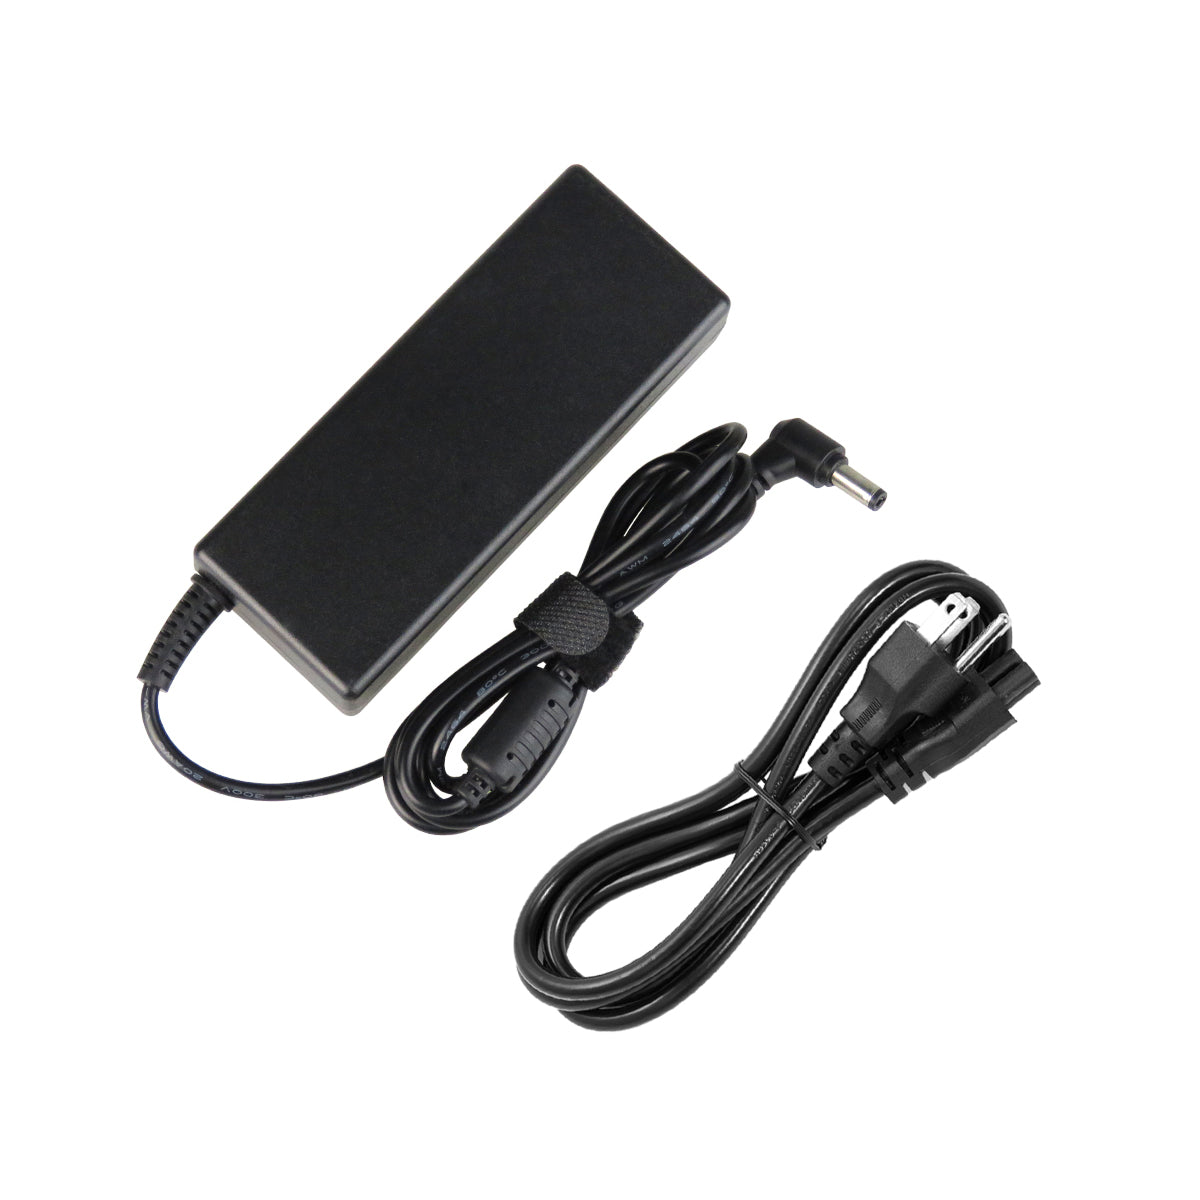 AC Adapter Charger for Lenovo Essential G770 Notebook.